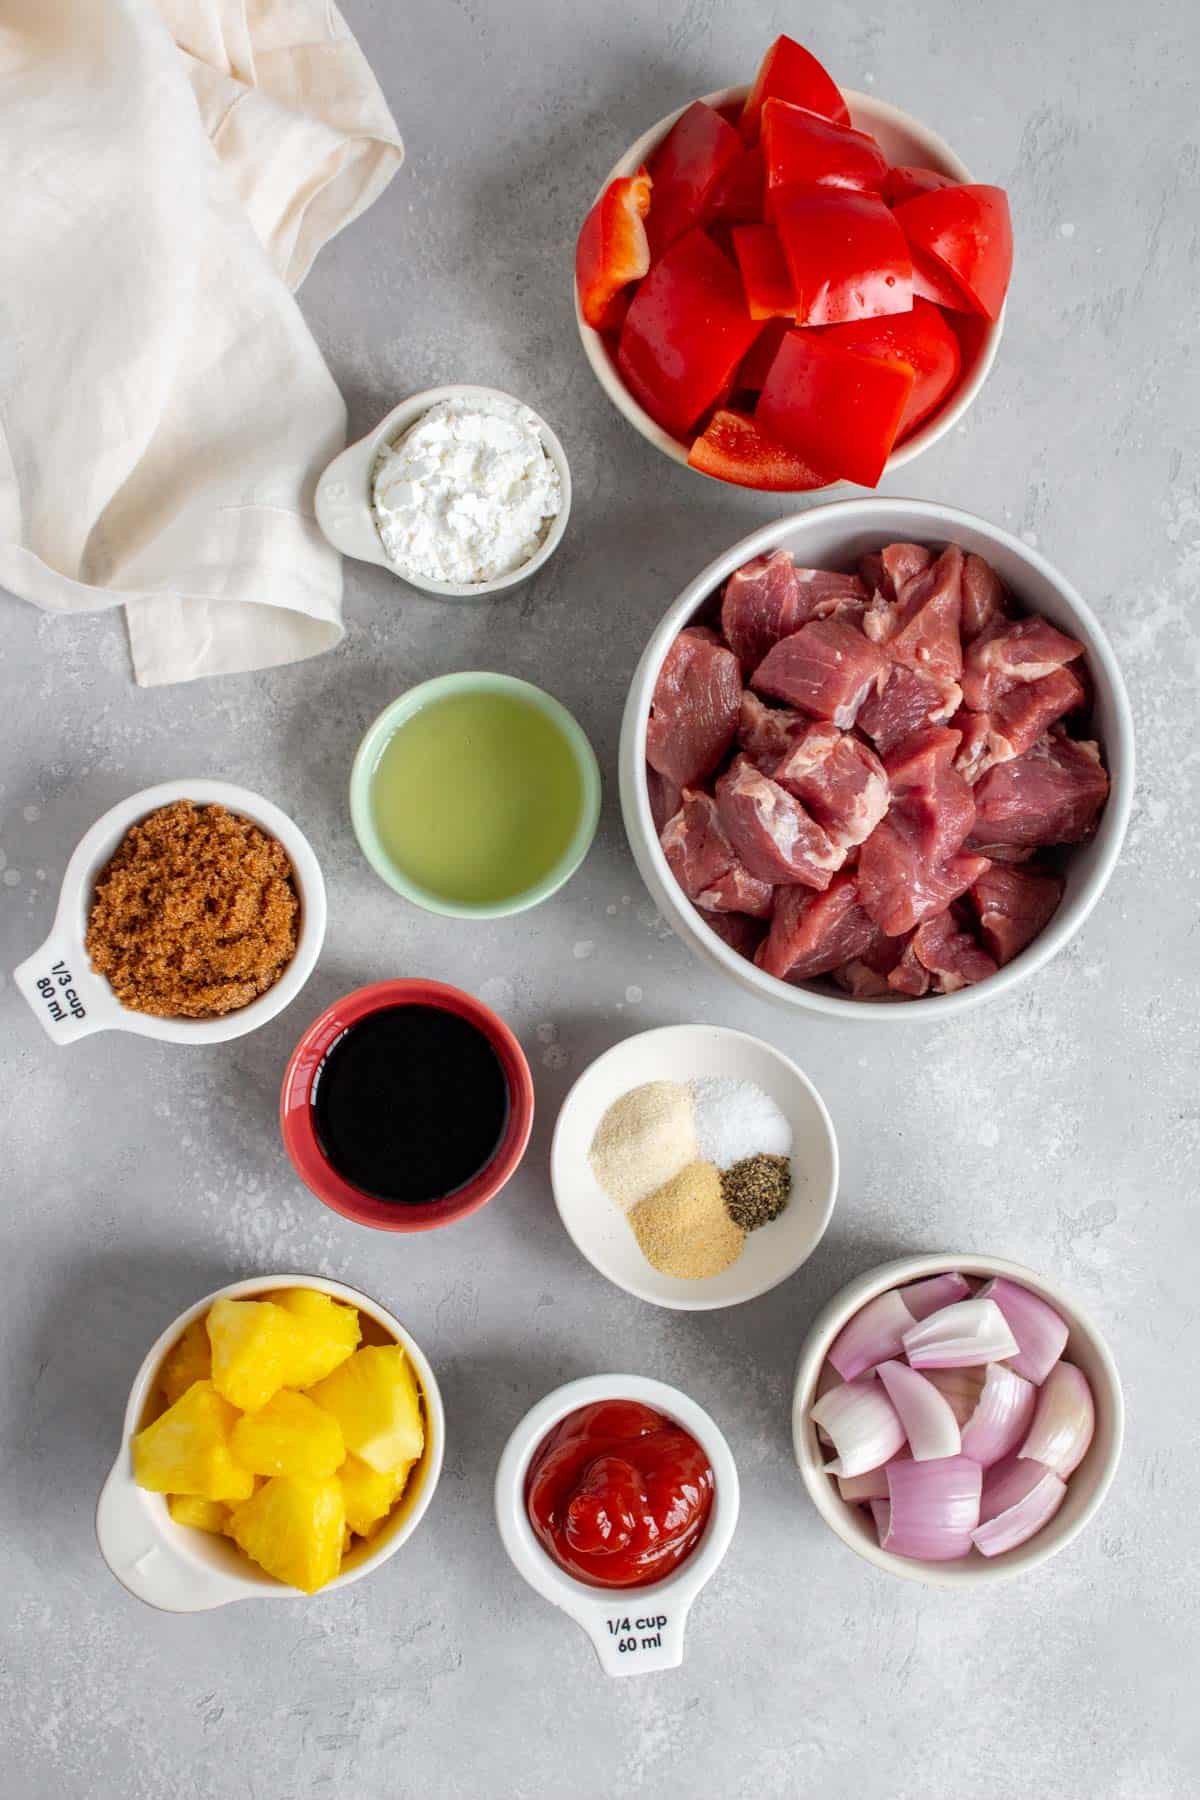 Ingredients needed to make sweet and sour pork.